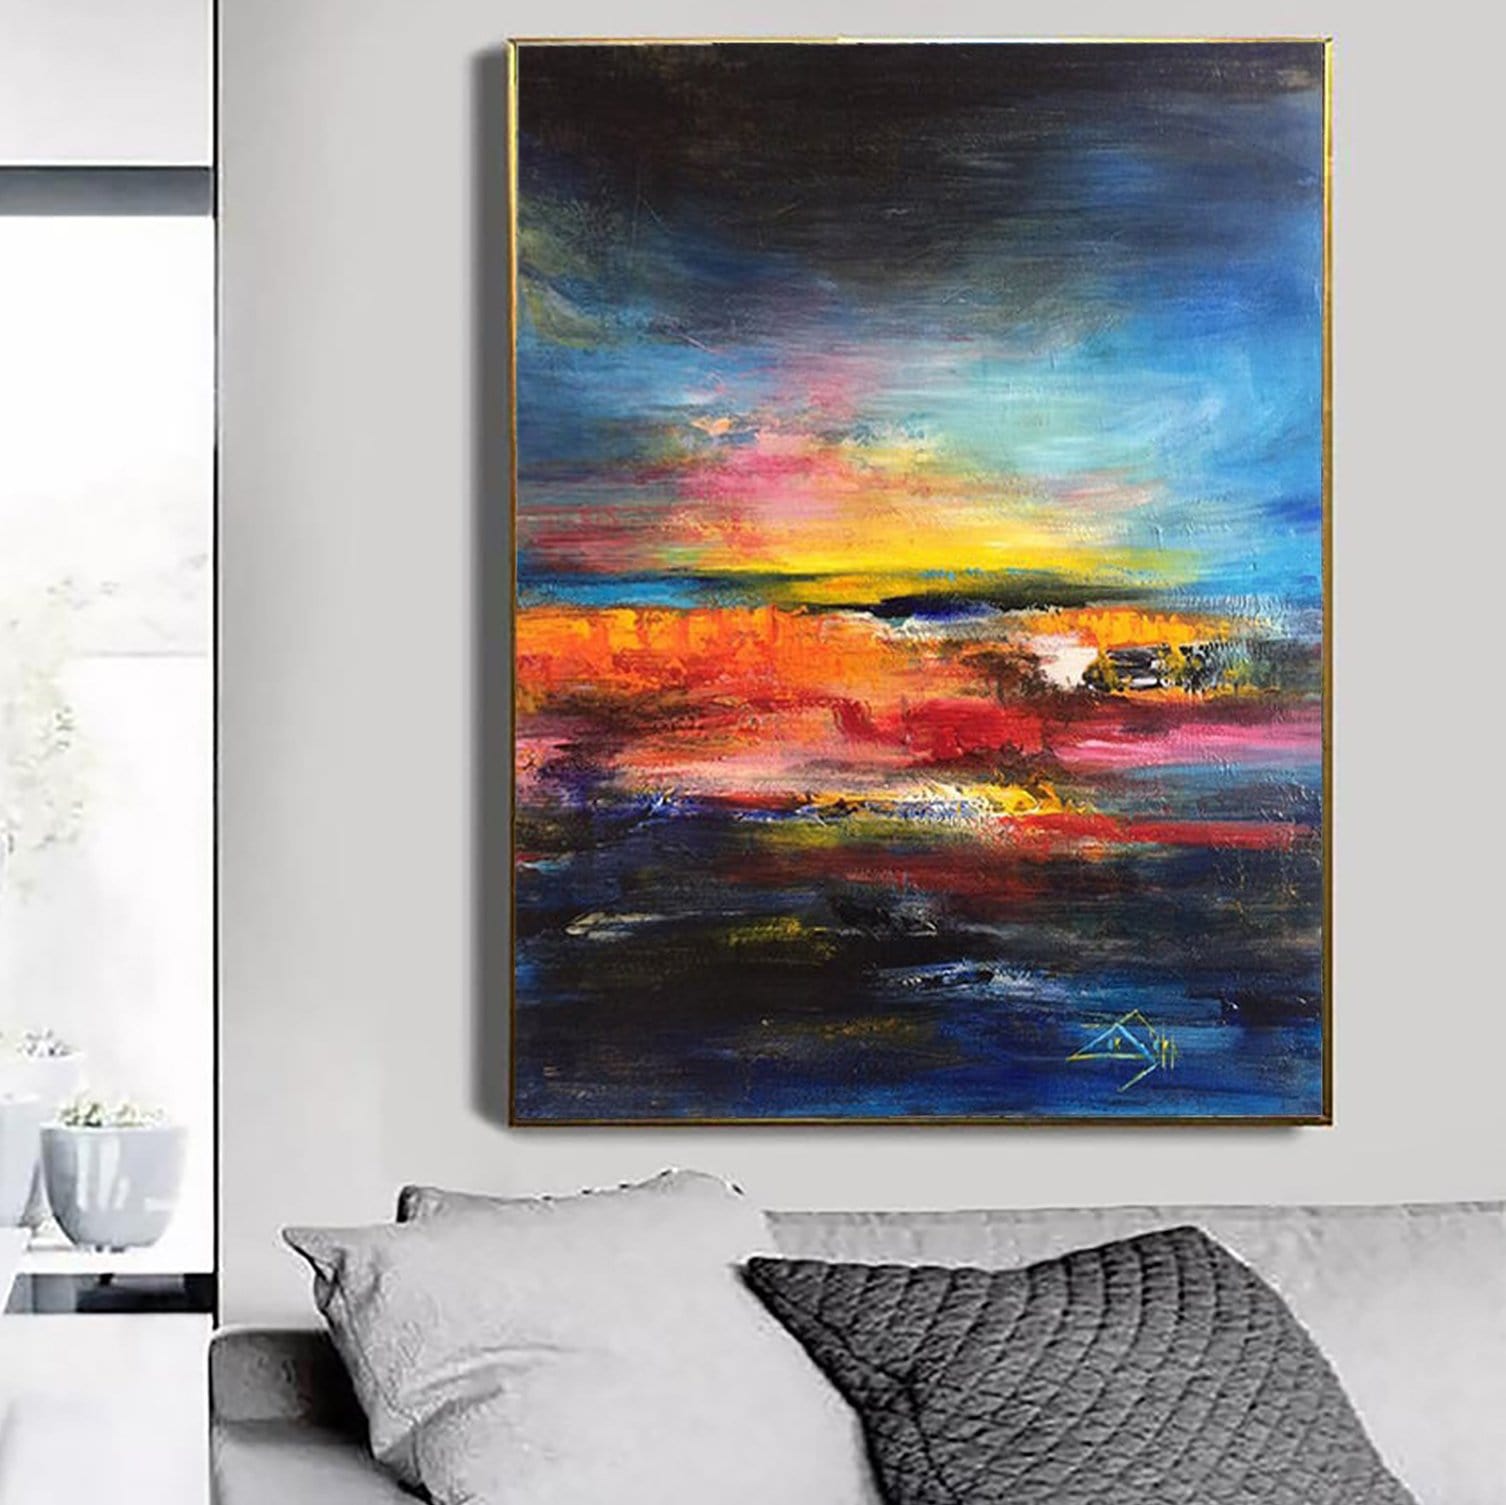 COLORFUL SUNSET from $310.18